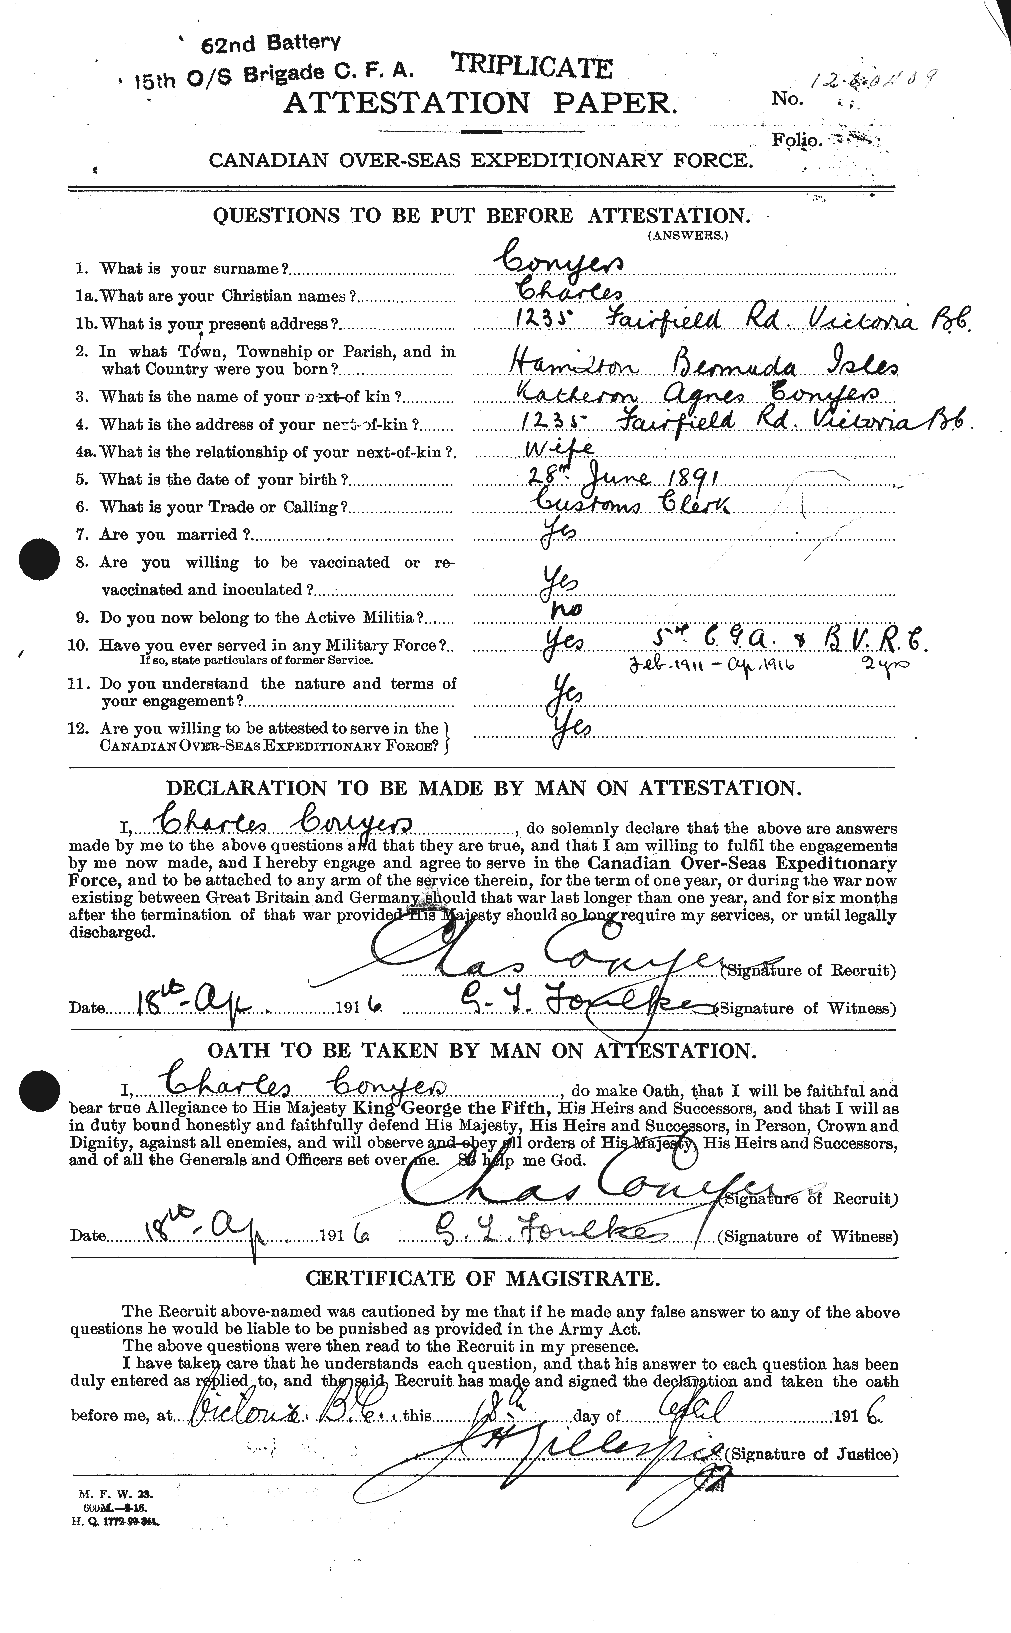 Personnel Records of the First World War - CEF 072879a